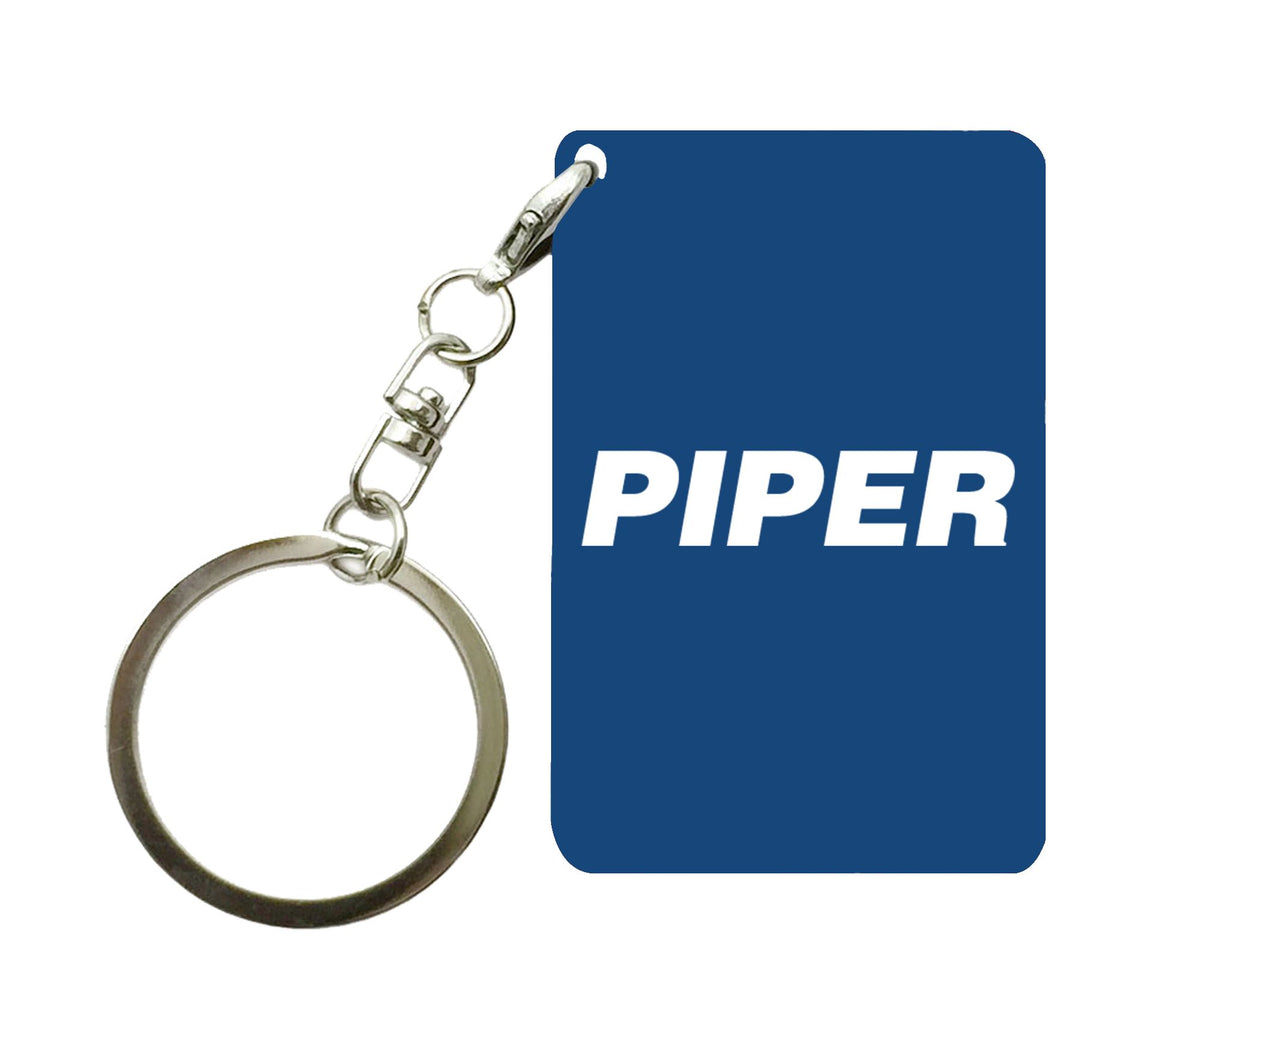 Piper & Text Designed Key Chains